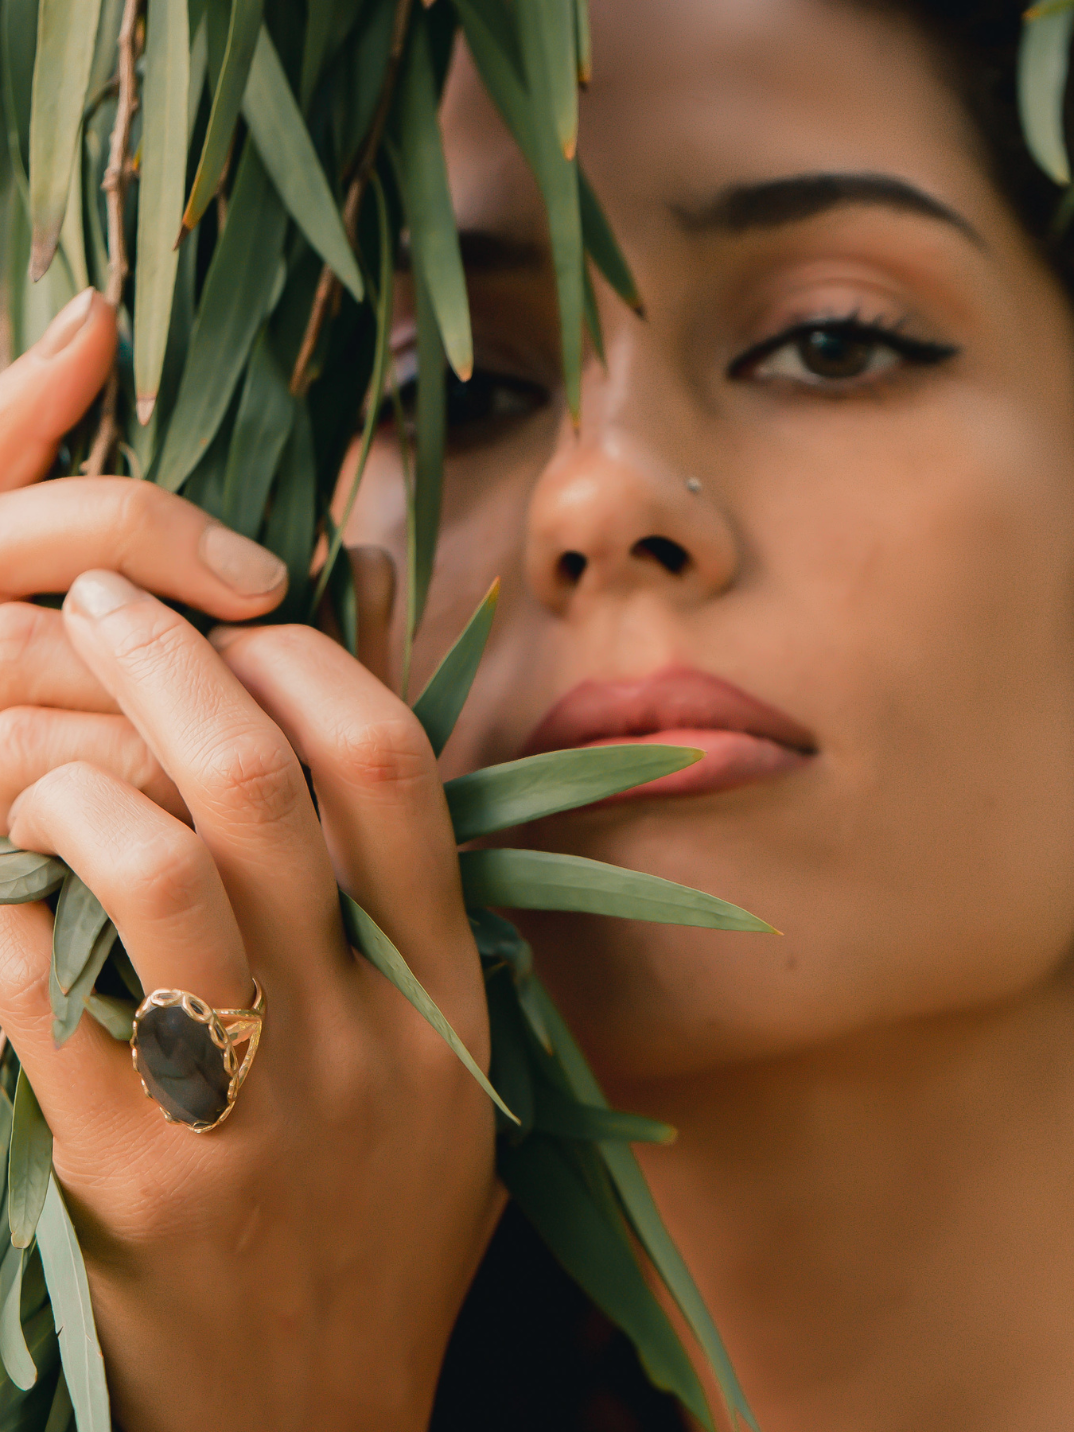 Be dazzled by our Labradorite and 18 Karat Vermeil Gold cocktail ring. Ethical handcrafted sustainable jewelry